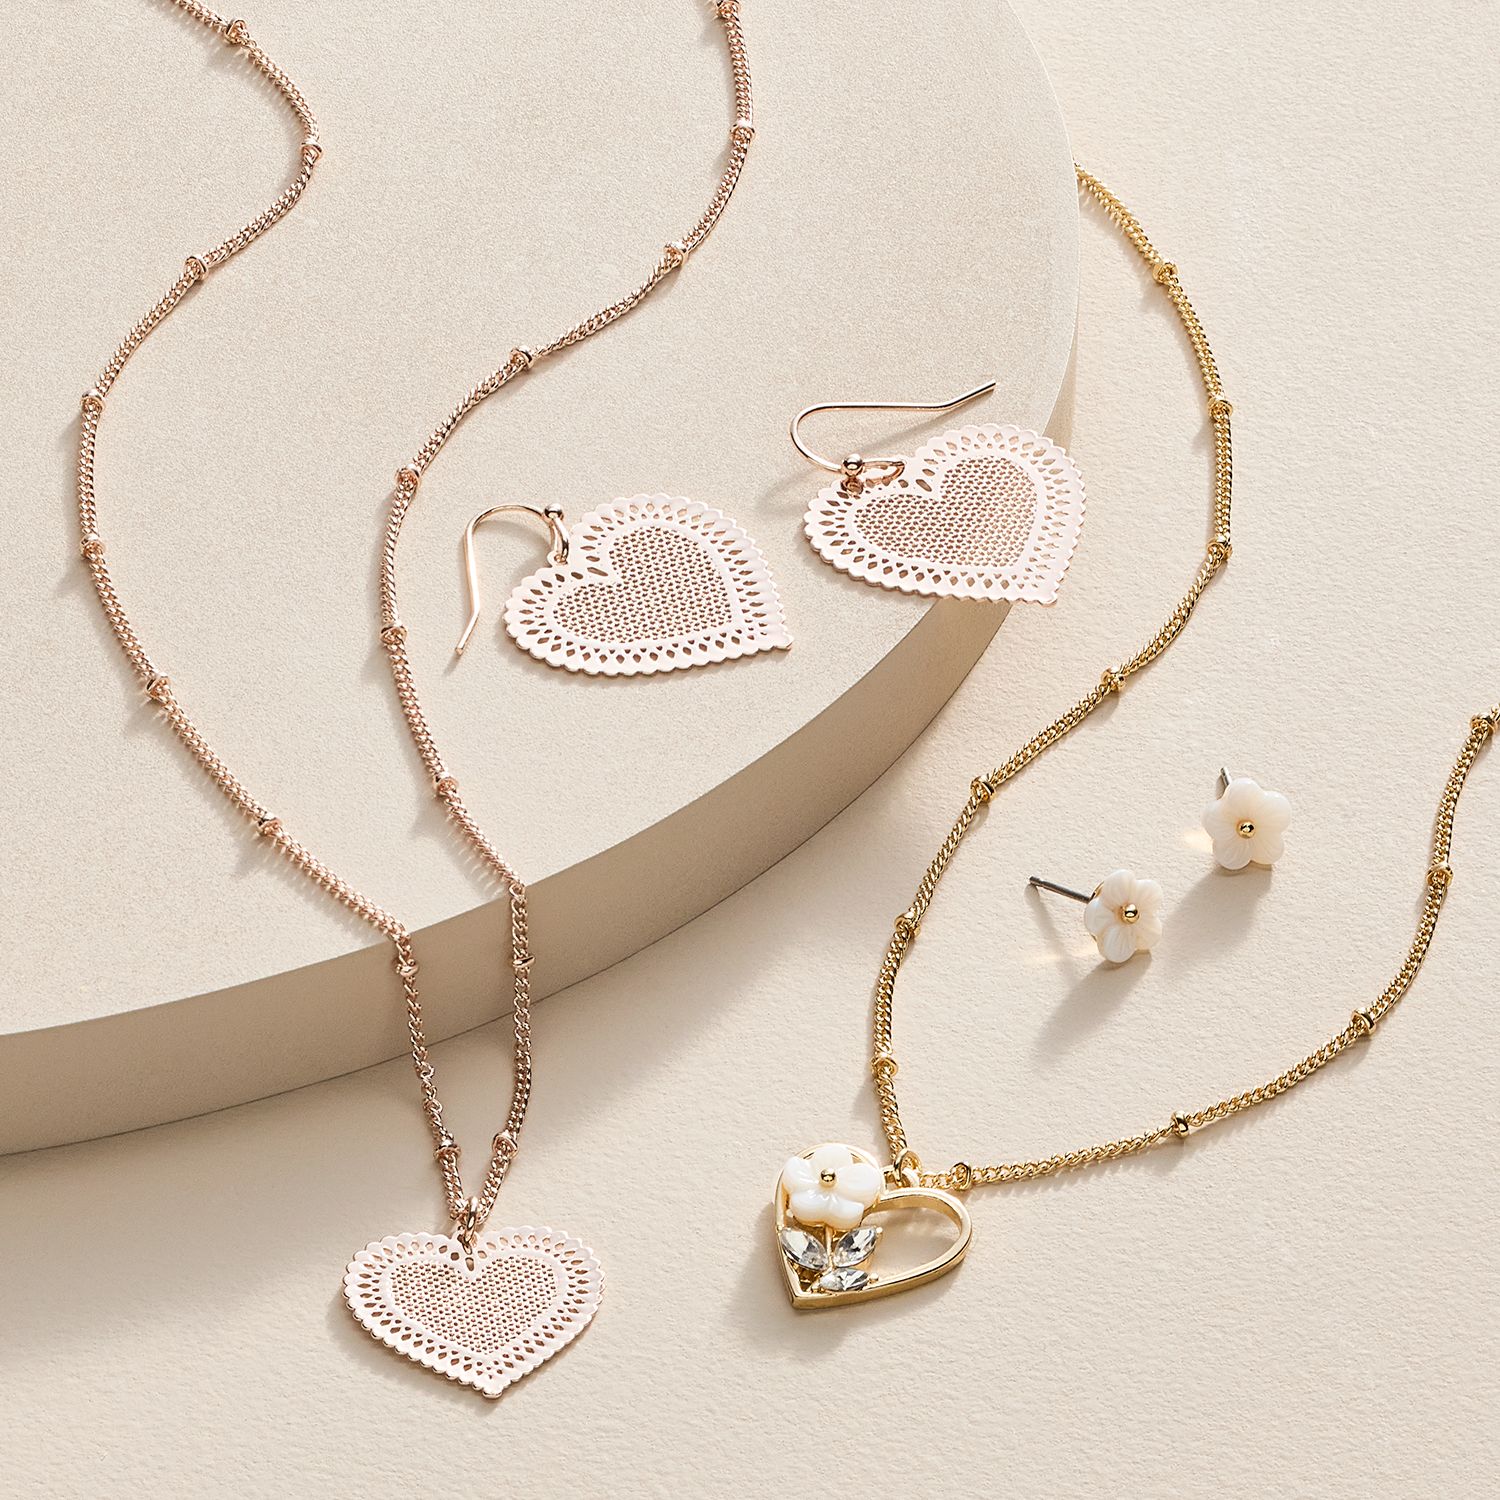 No Valentine's Day look is complete without stunning accessories, like jewelry.